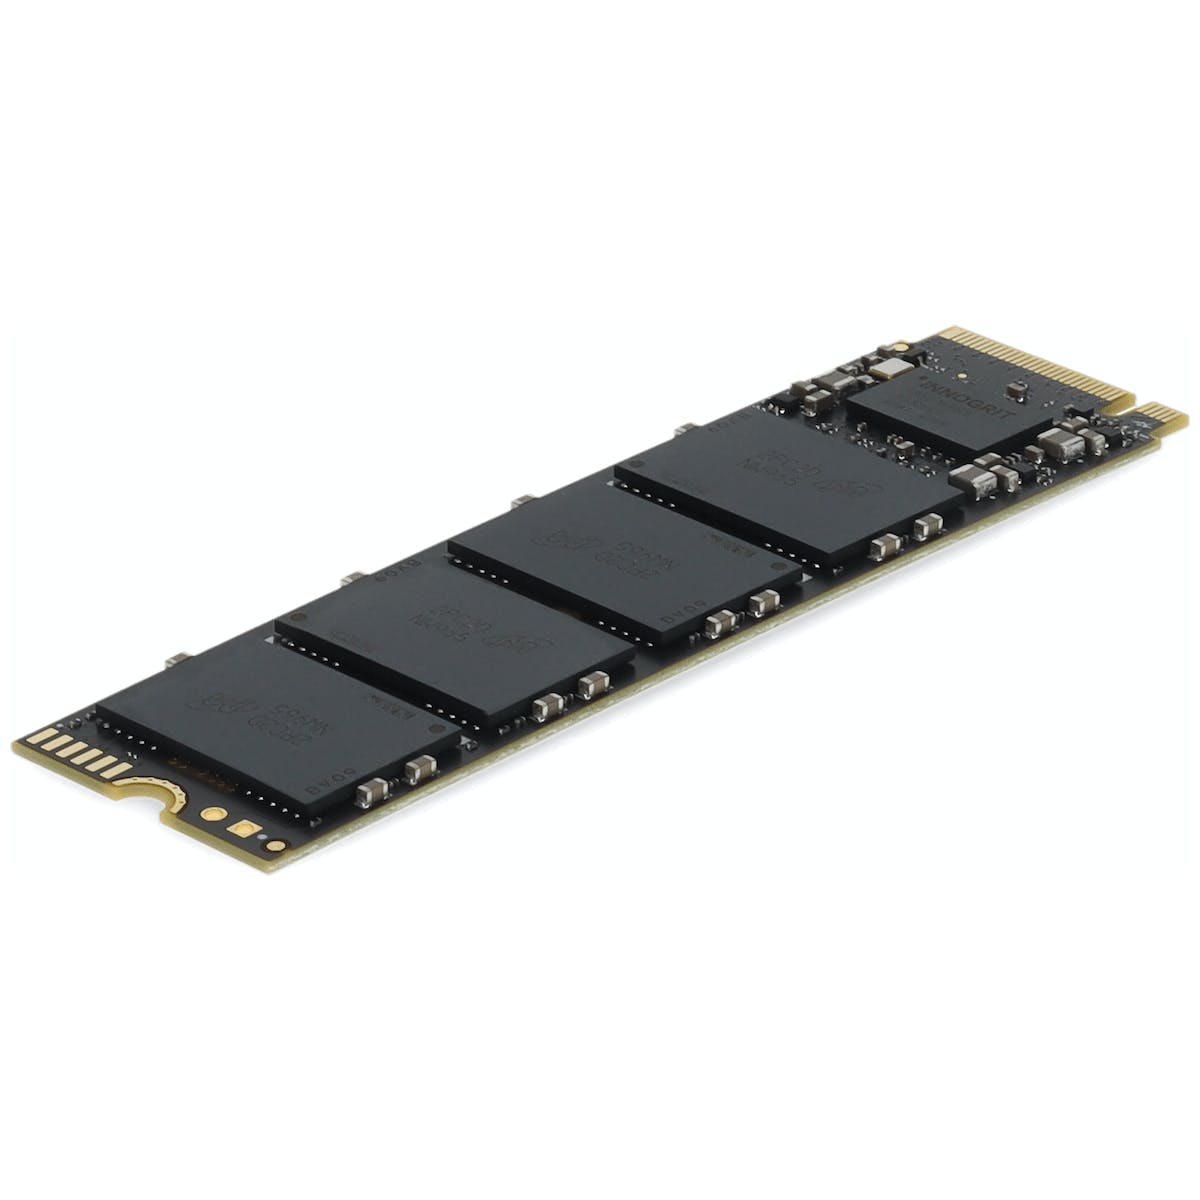 Picture of Addon ADD-SSDTS256GB-D8 256GB M.2 2280 PCIe Gen 3 x4 NVMe 1.4 Solid State Drive